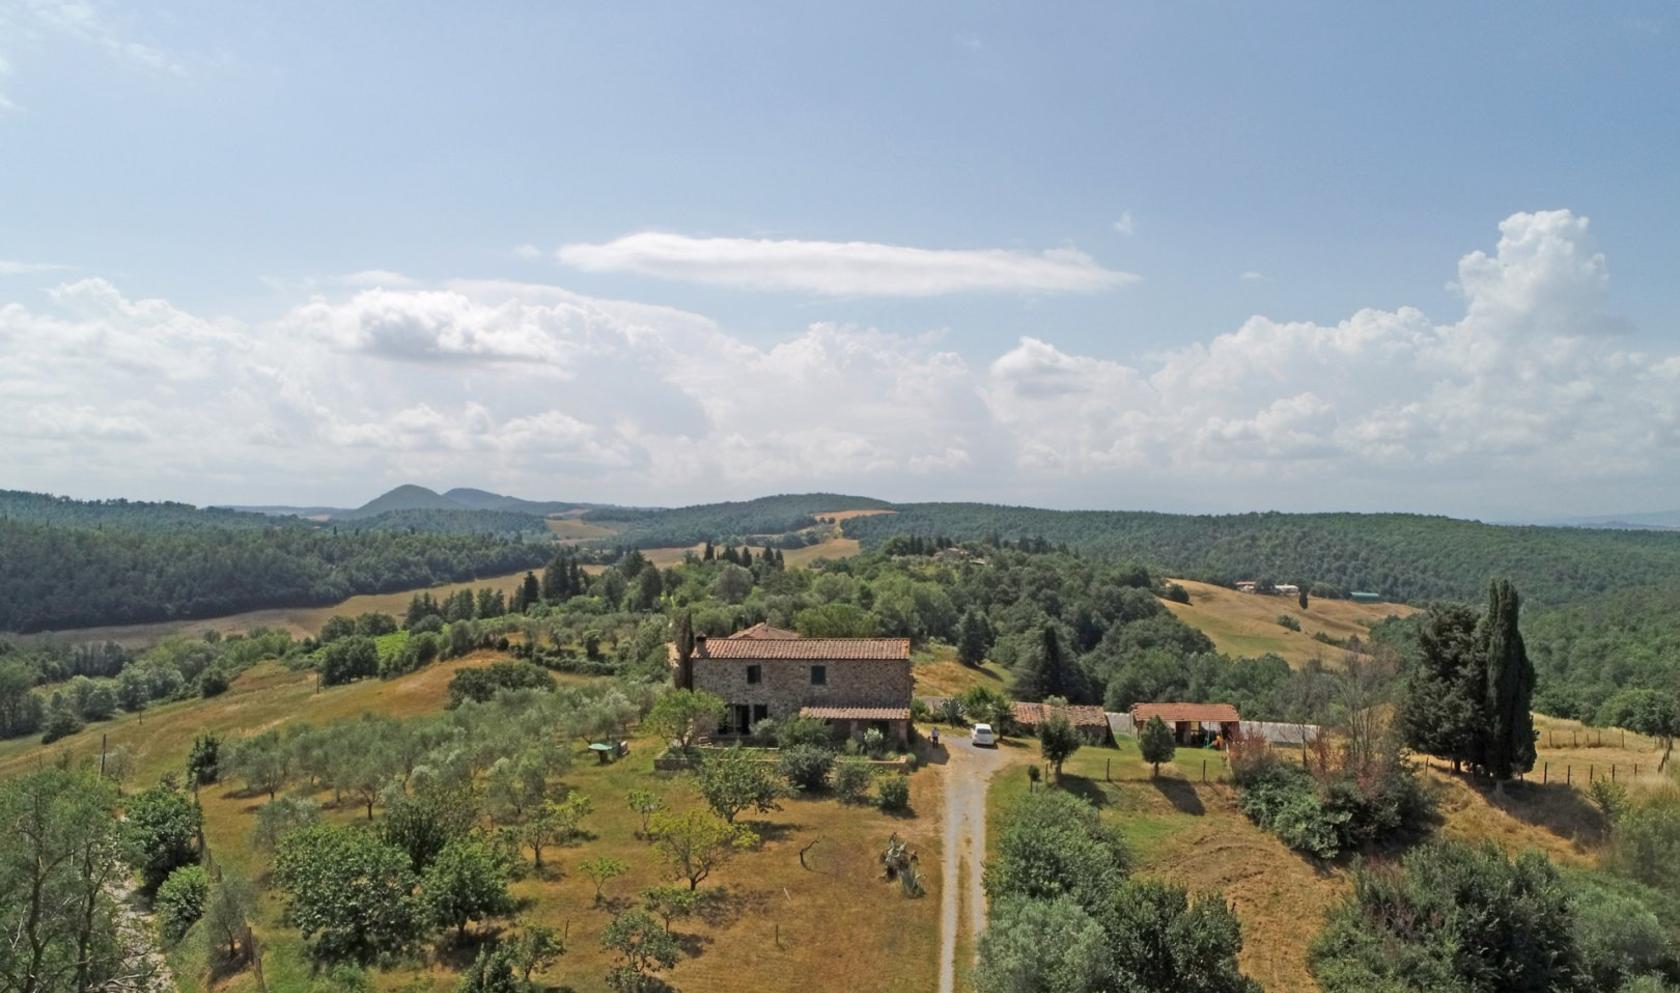 Toscana Immobiliare - Farm for sale In the Tuscan countryside, on the slopes of the Crete Senesi in a wonderful panoramic position